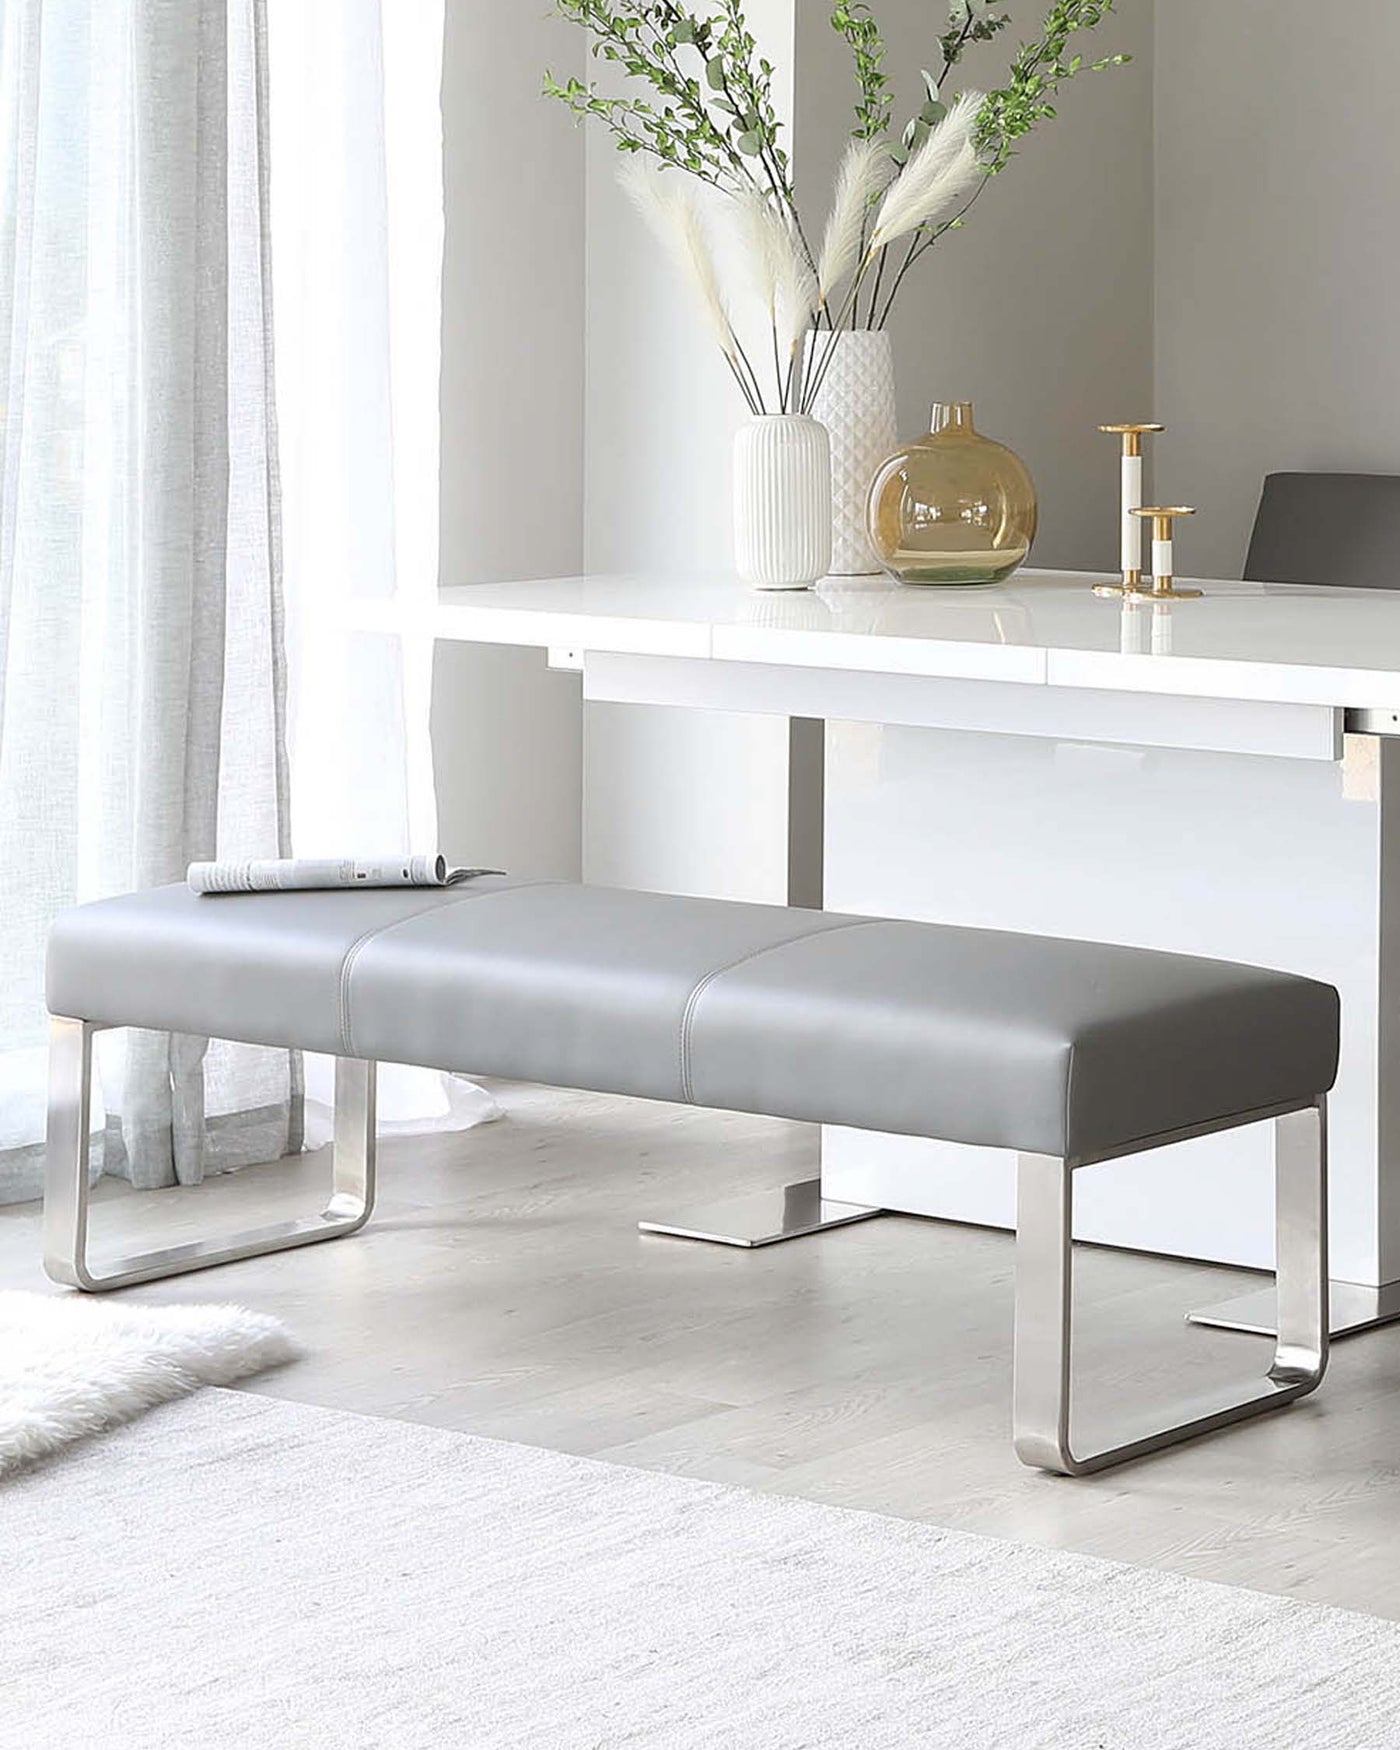 Modern minimalist furniture set including a sleek white desk with a clean, rectangular design and a grey upholstered bench with a chrome base, offering a contemporary look for a stylish home office or living space.